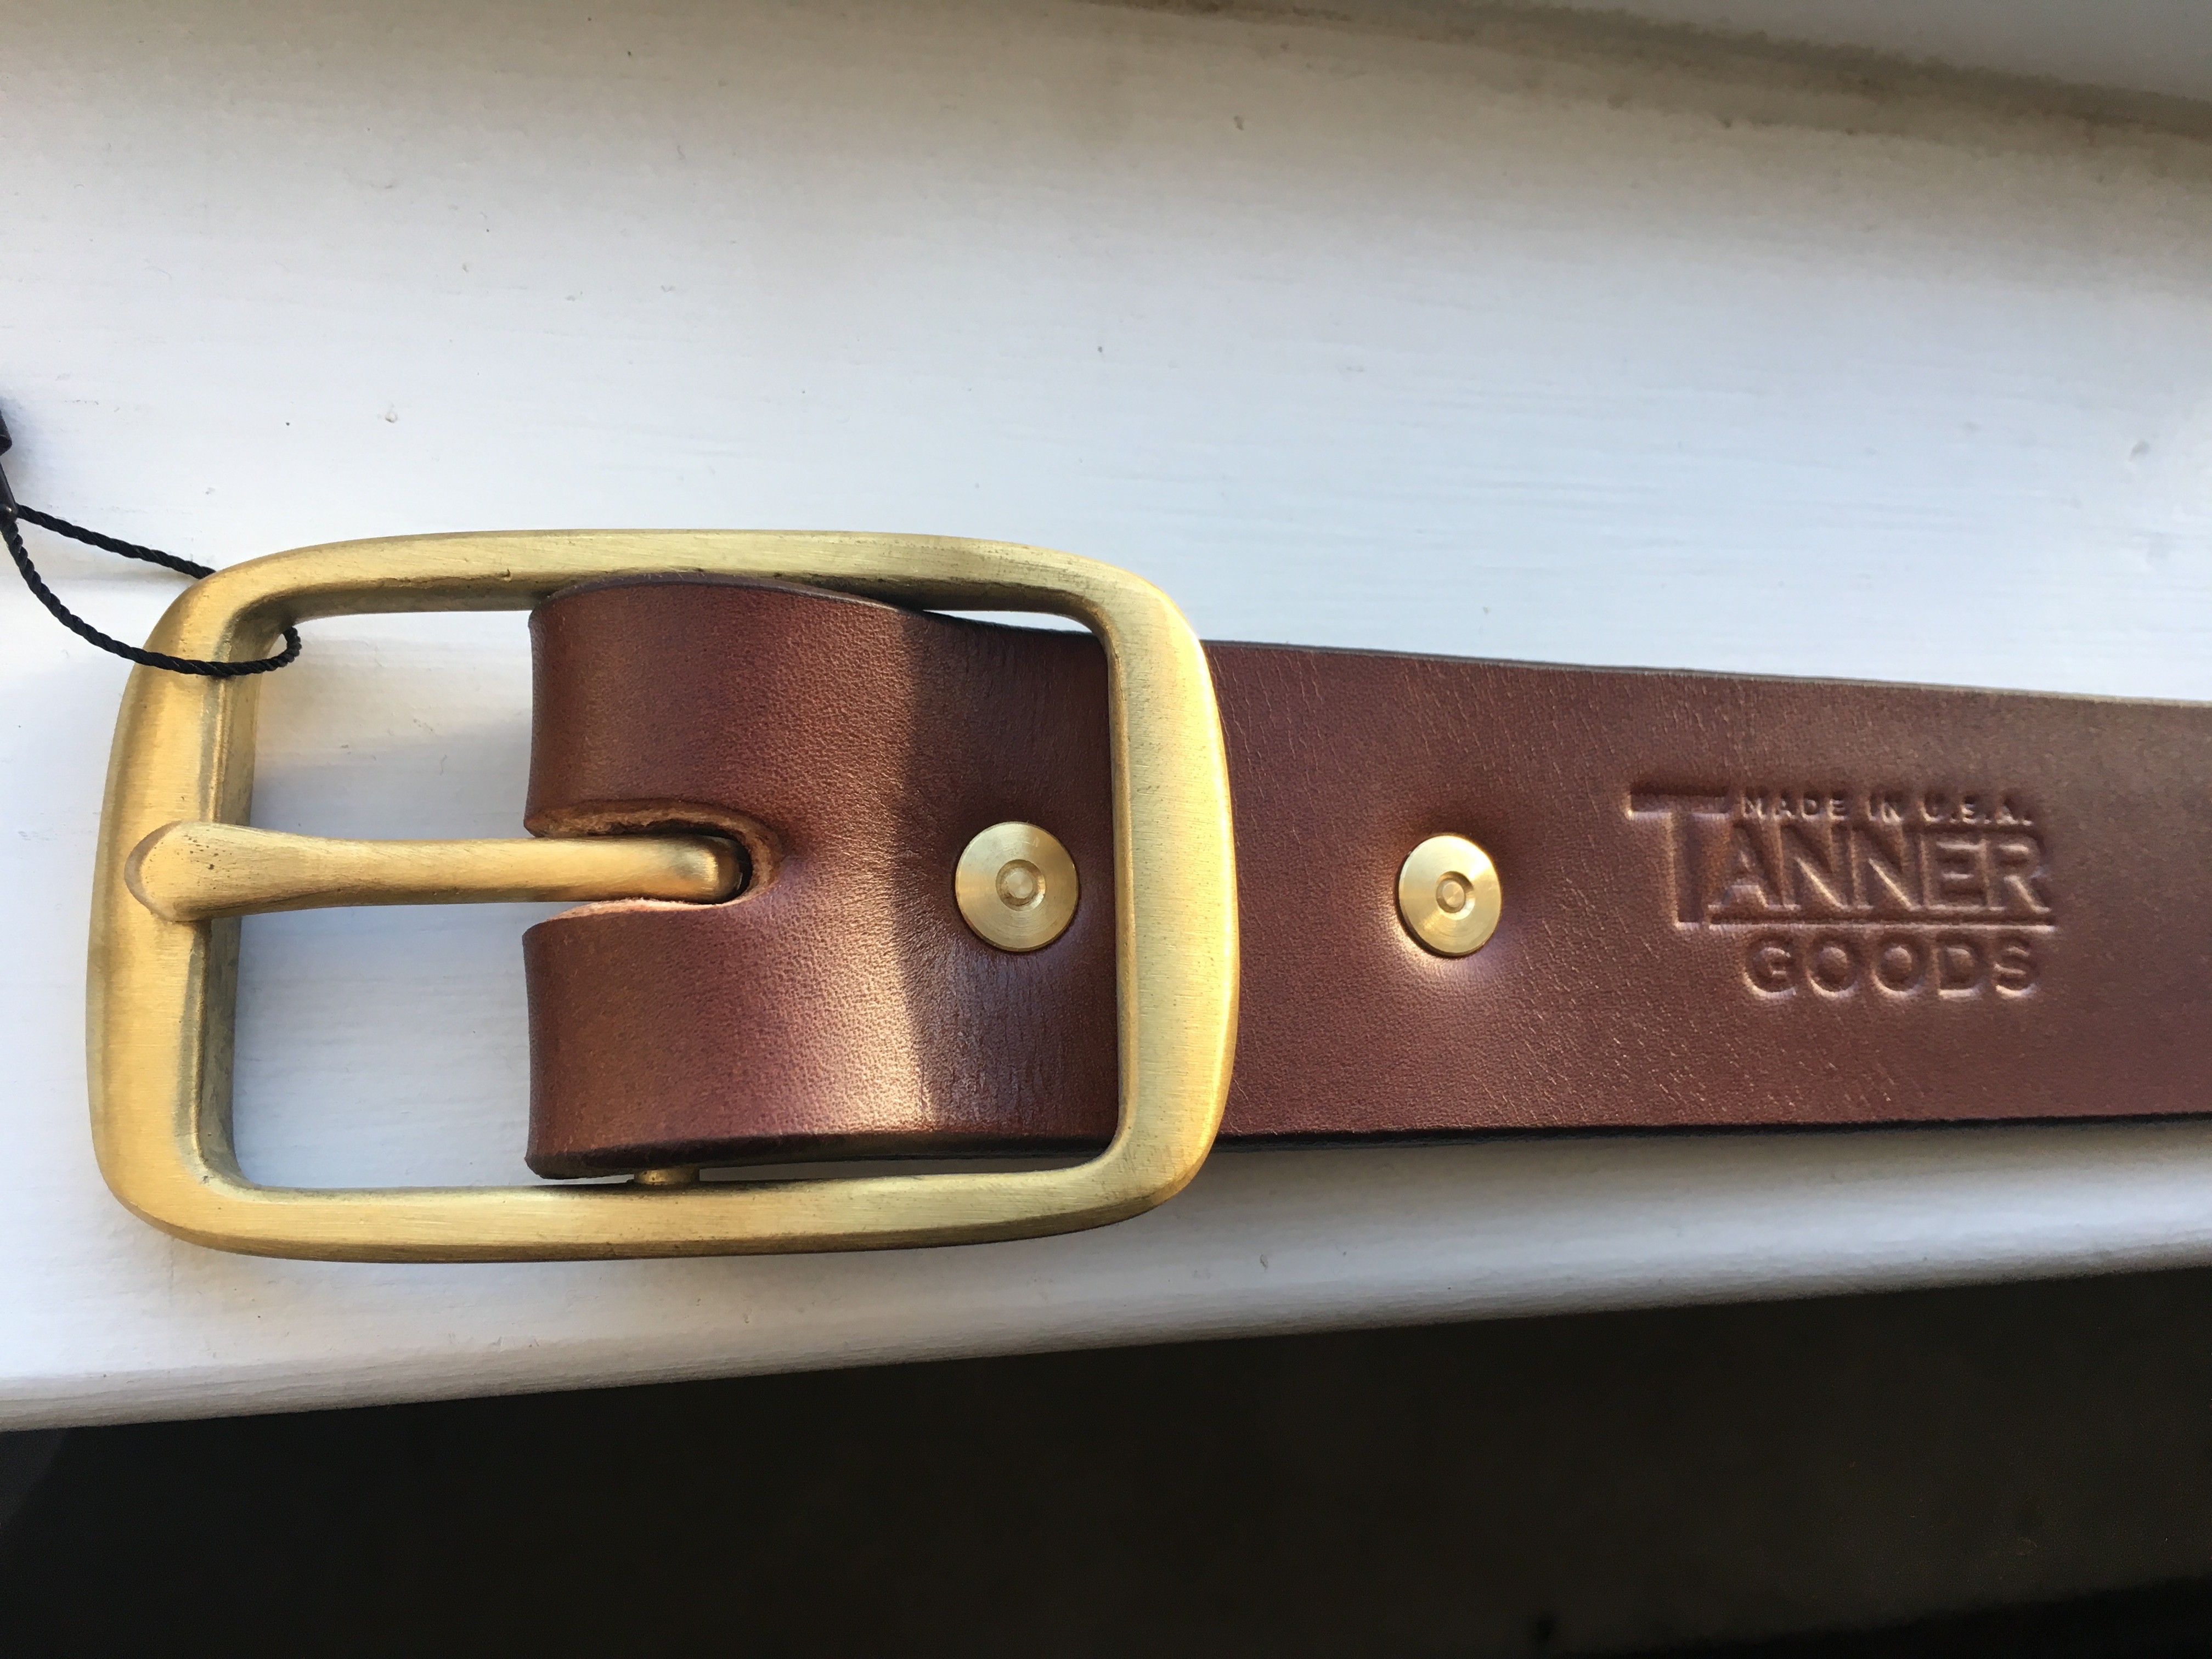 Tanner Goods “Standard” belt findings, opinion, and pictures | Styleforum